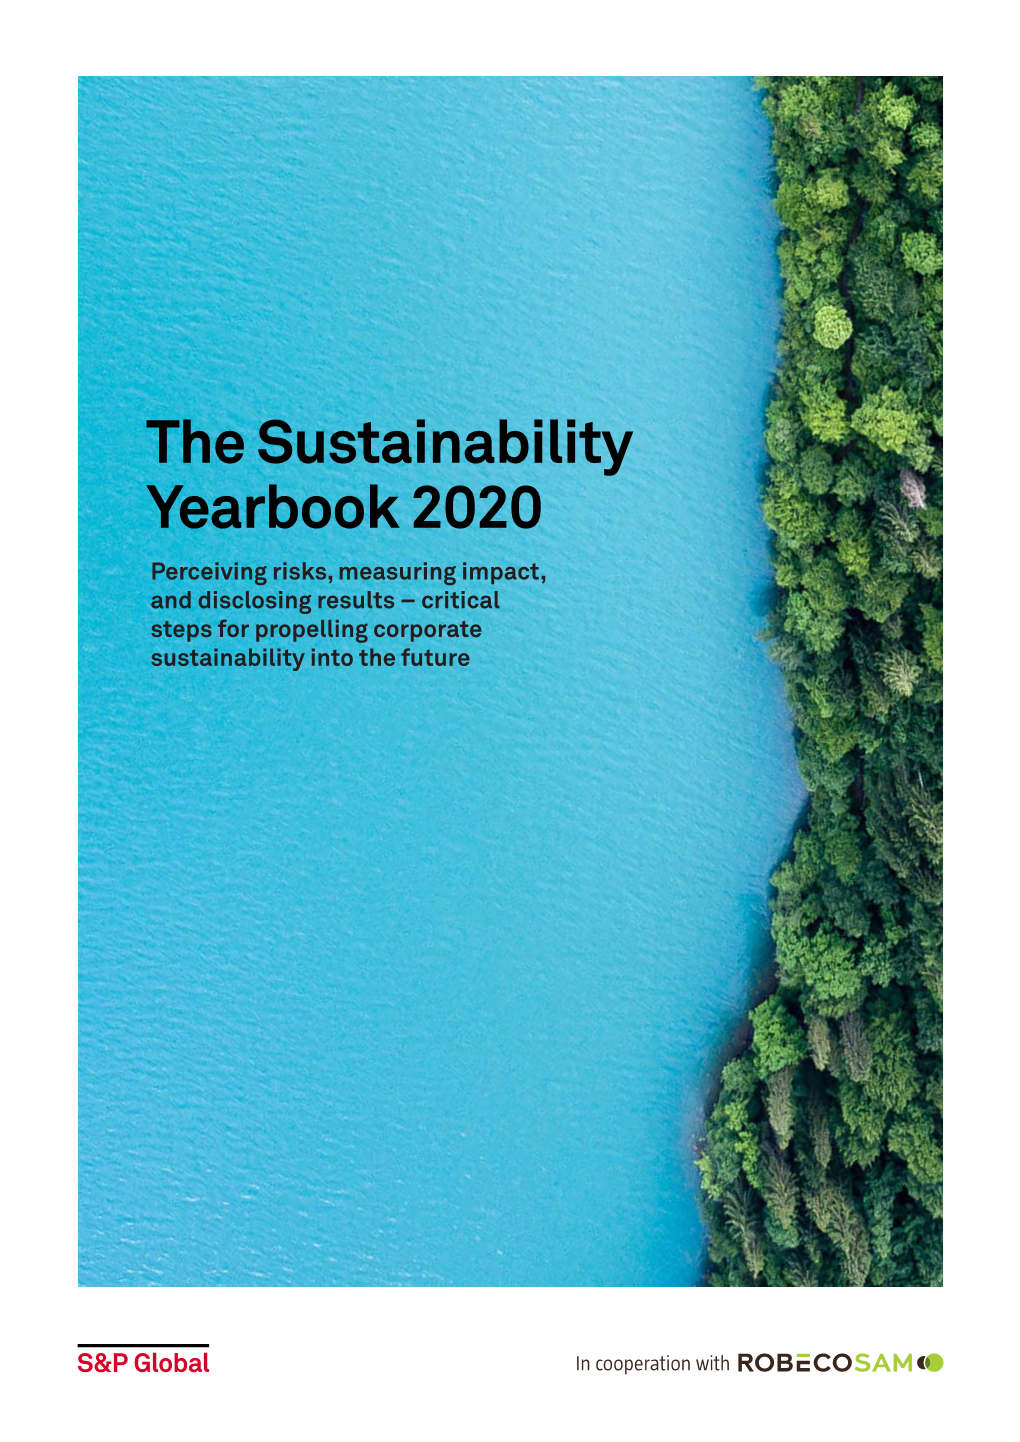 The Sustainability Yearbook 2020